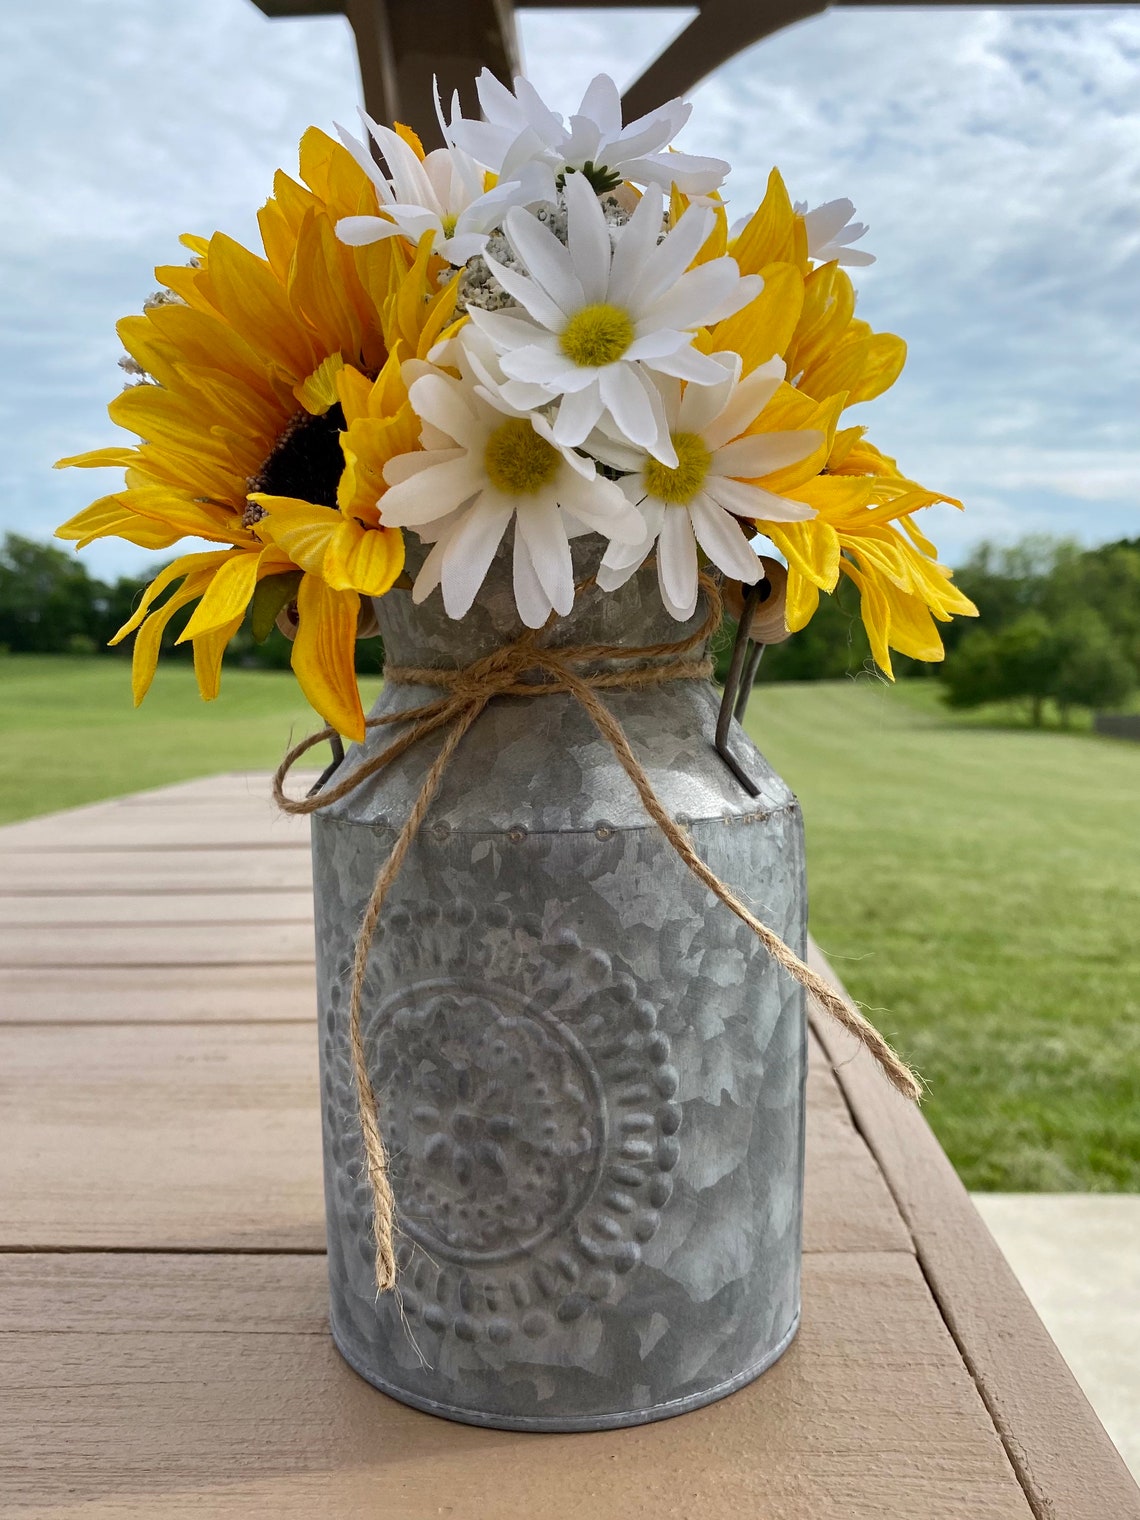 Galvanized Metal Milk Can With Sunflowers and Daisies | Etsy